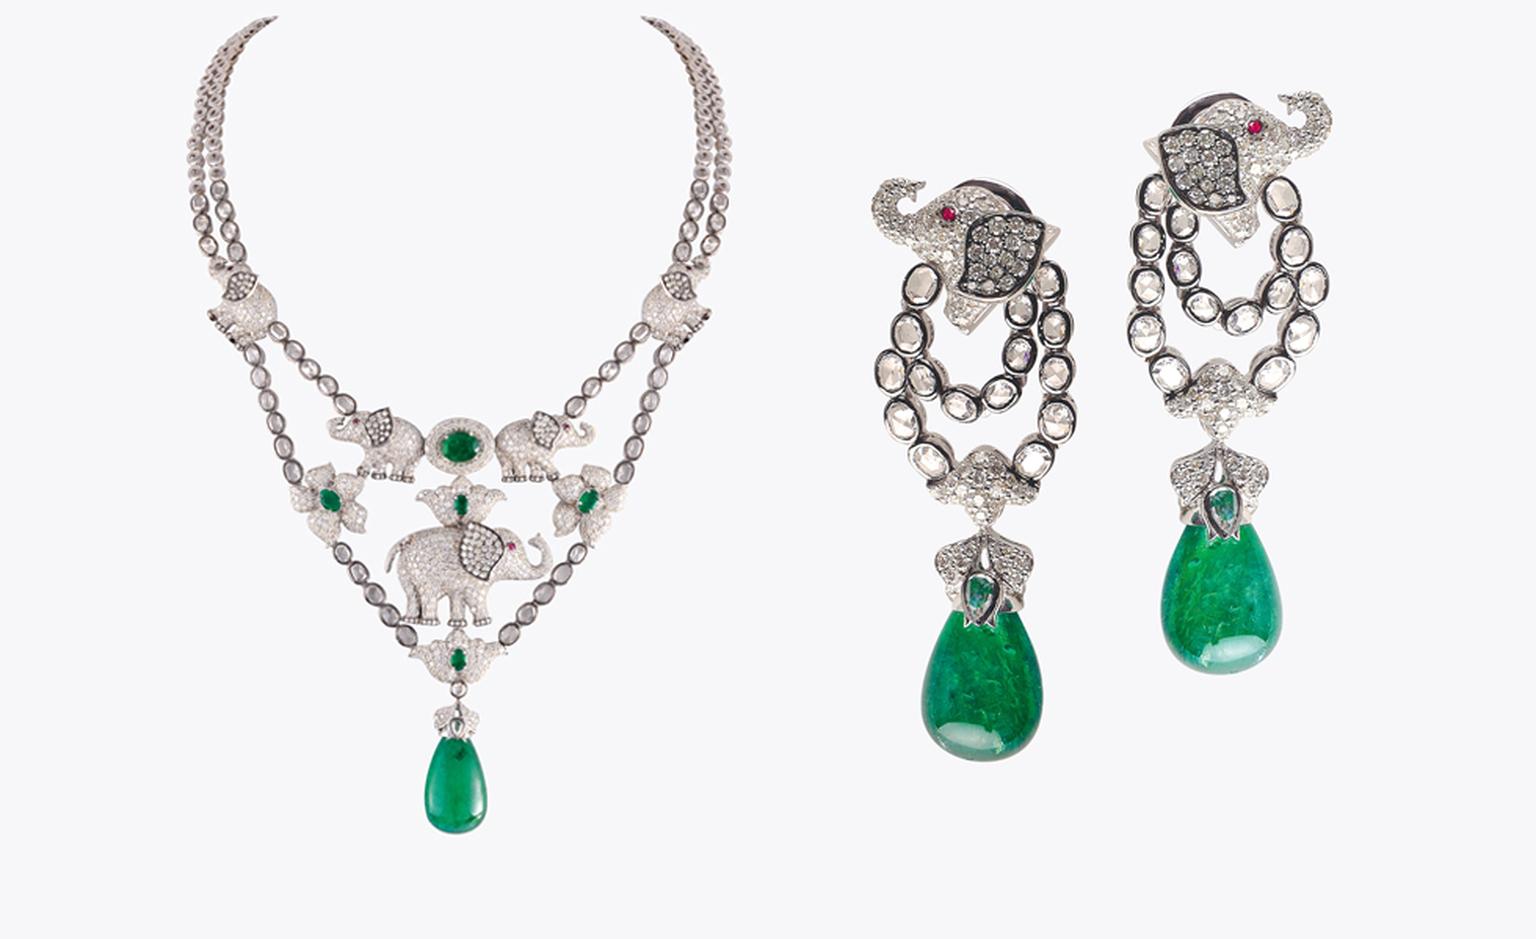 Khanna, New Delhi. Necklace and earrings, Zambian emeralds and diamonds. Sold as a set, price from $40 000.